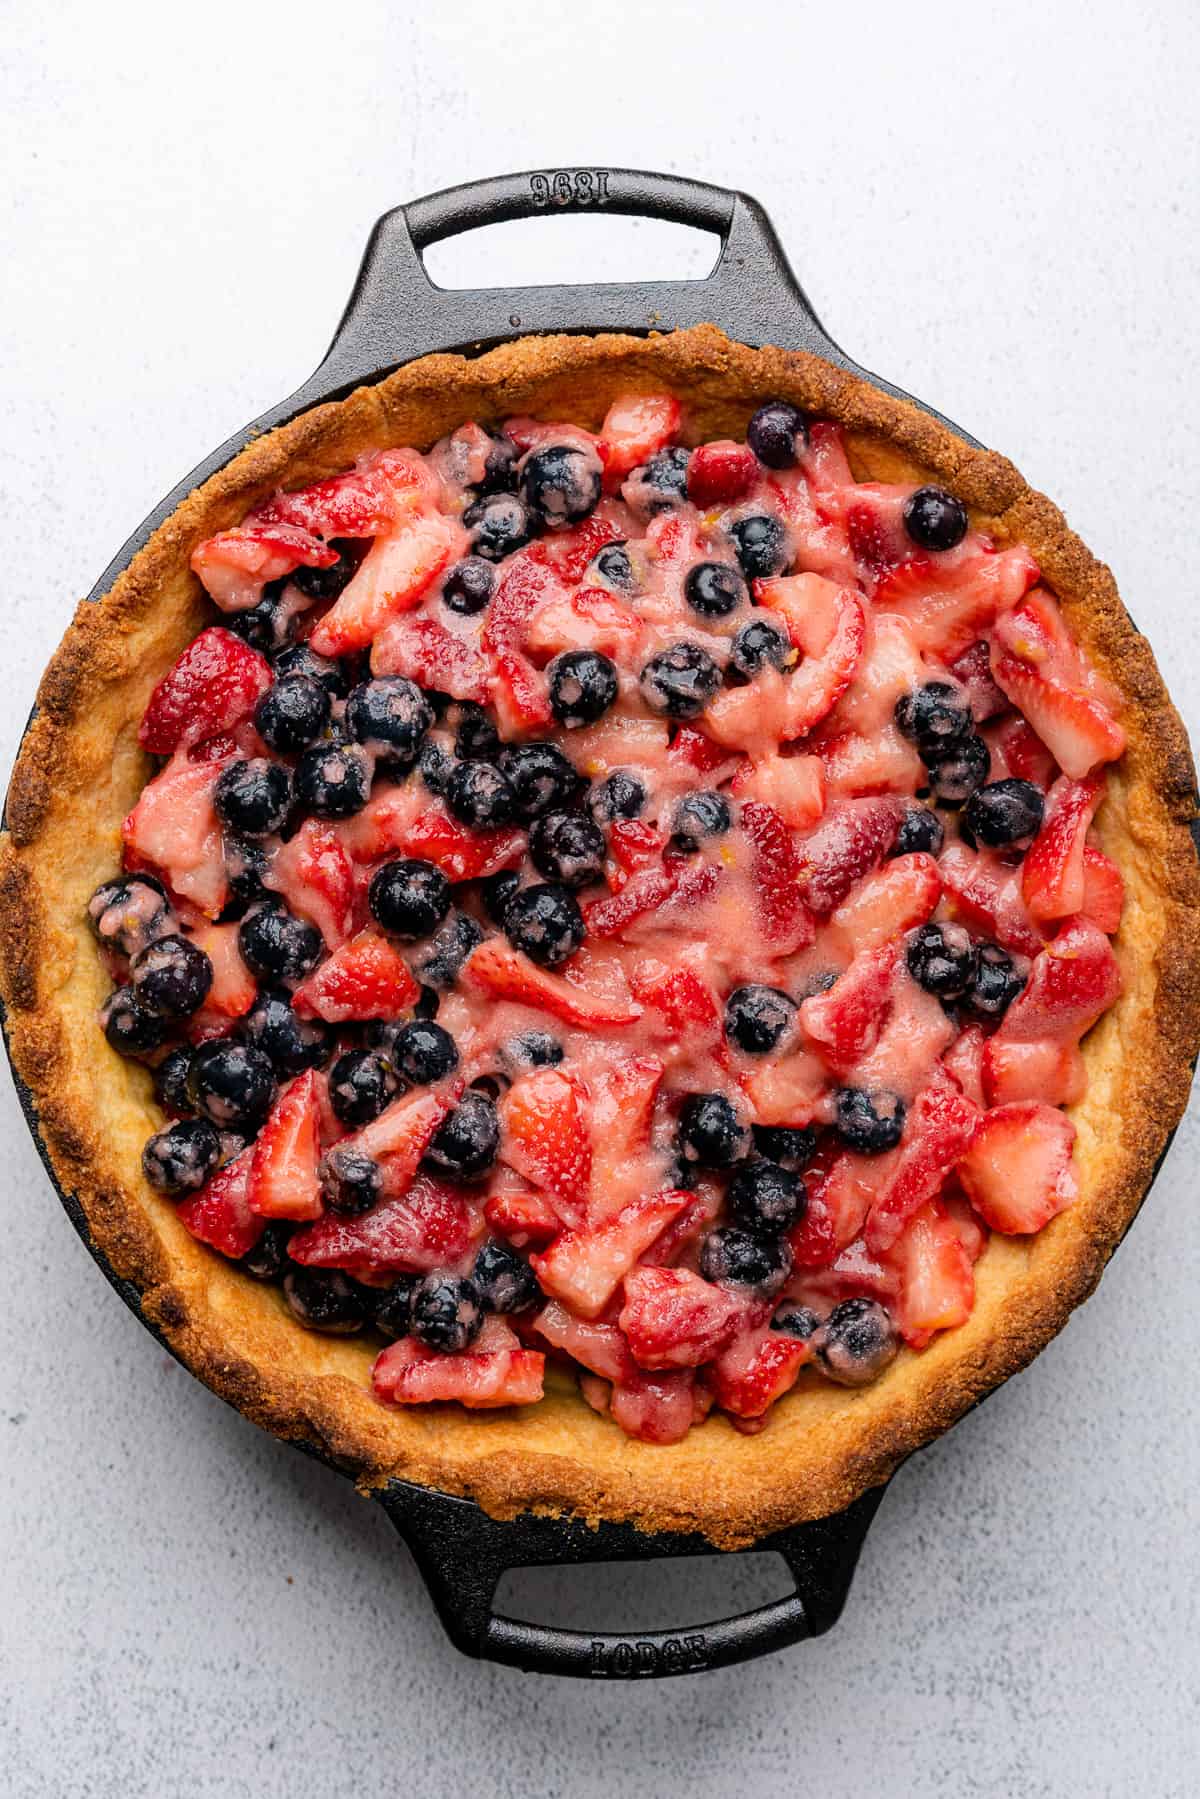 prepared berries inside of a browned pie crust in a cast iron skillet